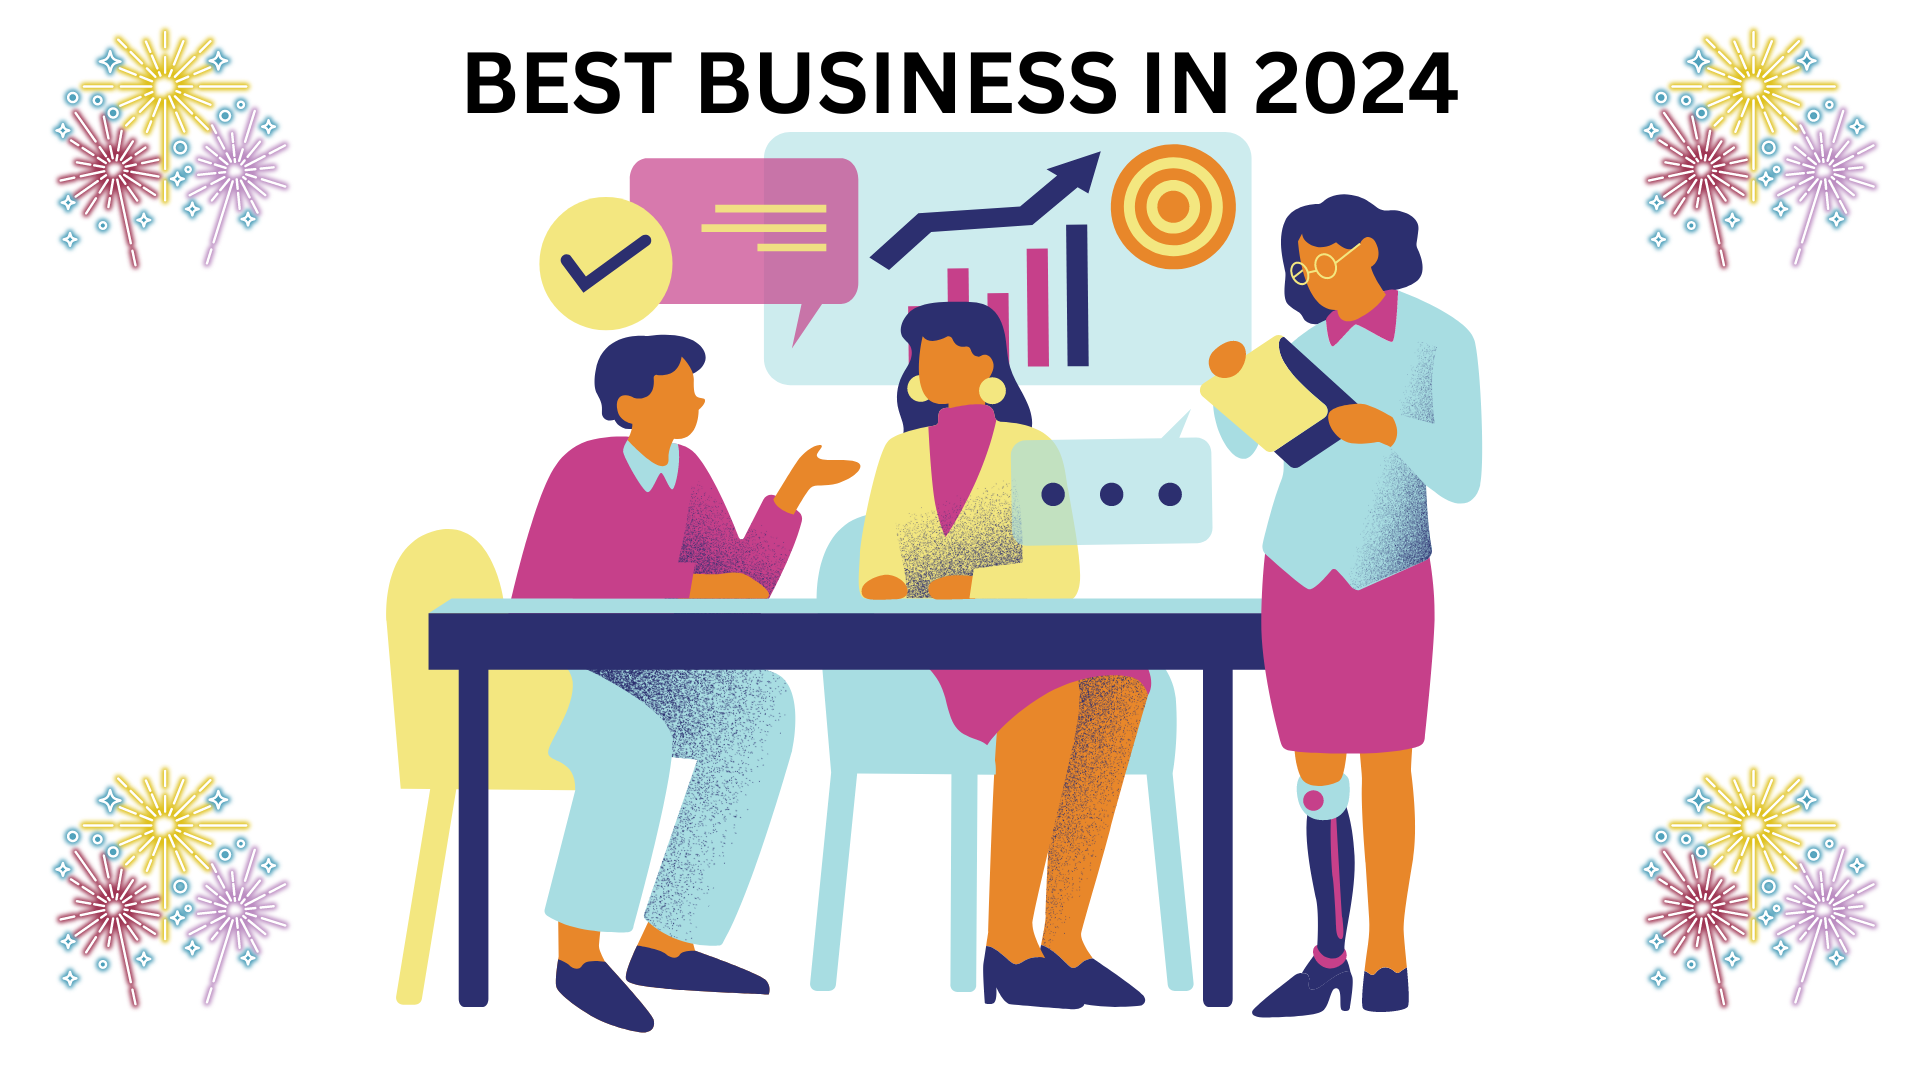 Best Business to Start in 2024